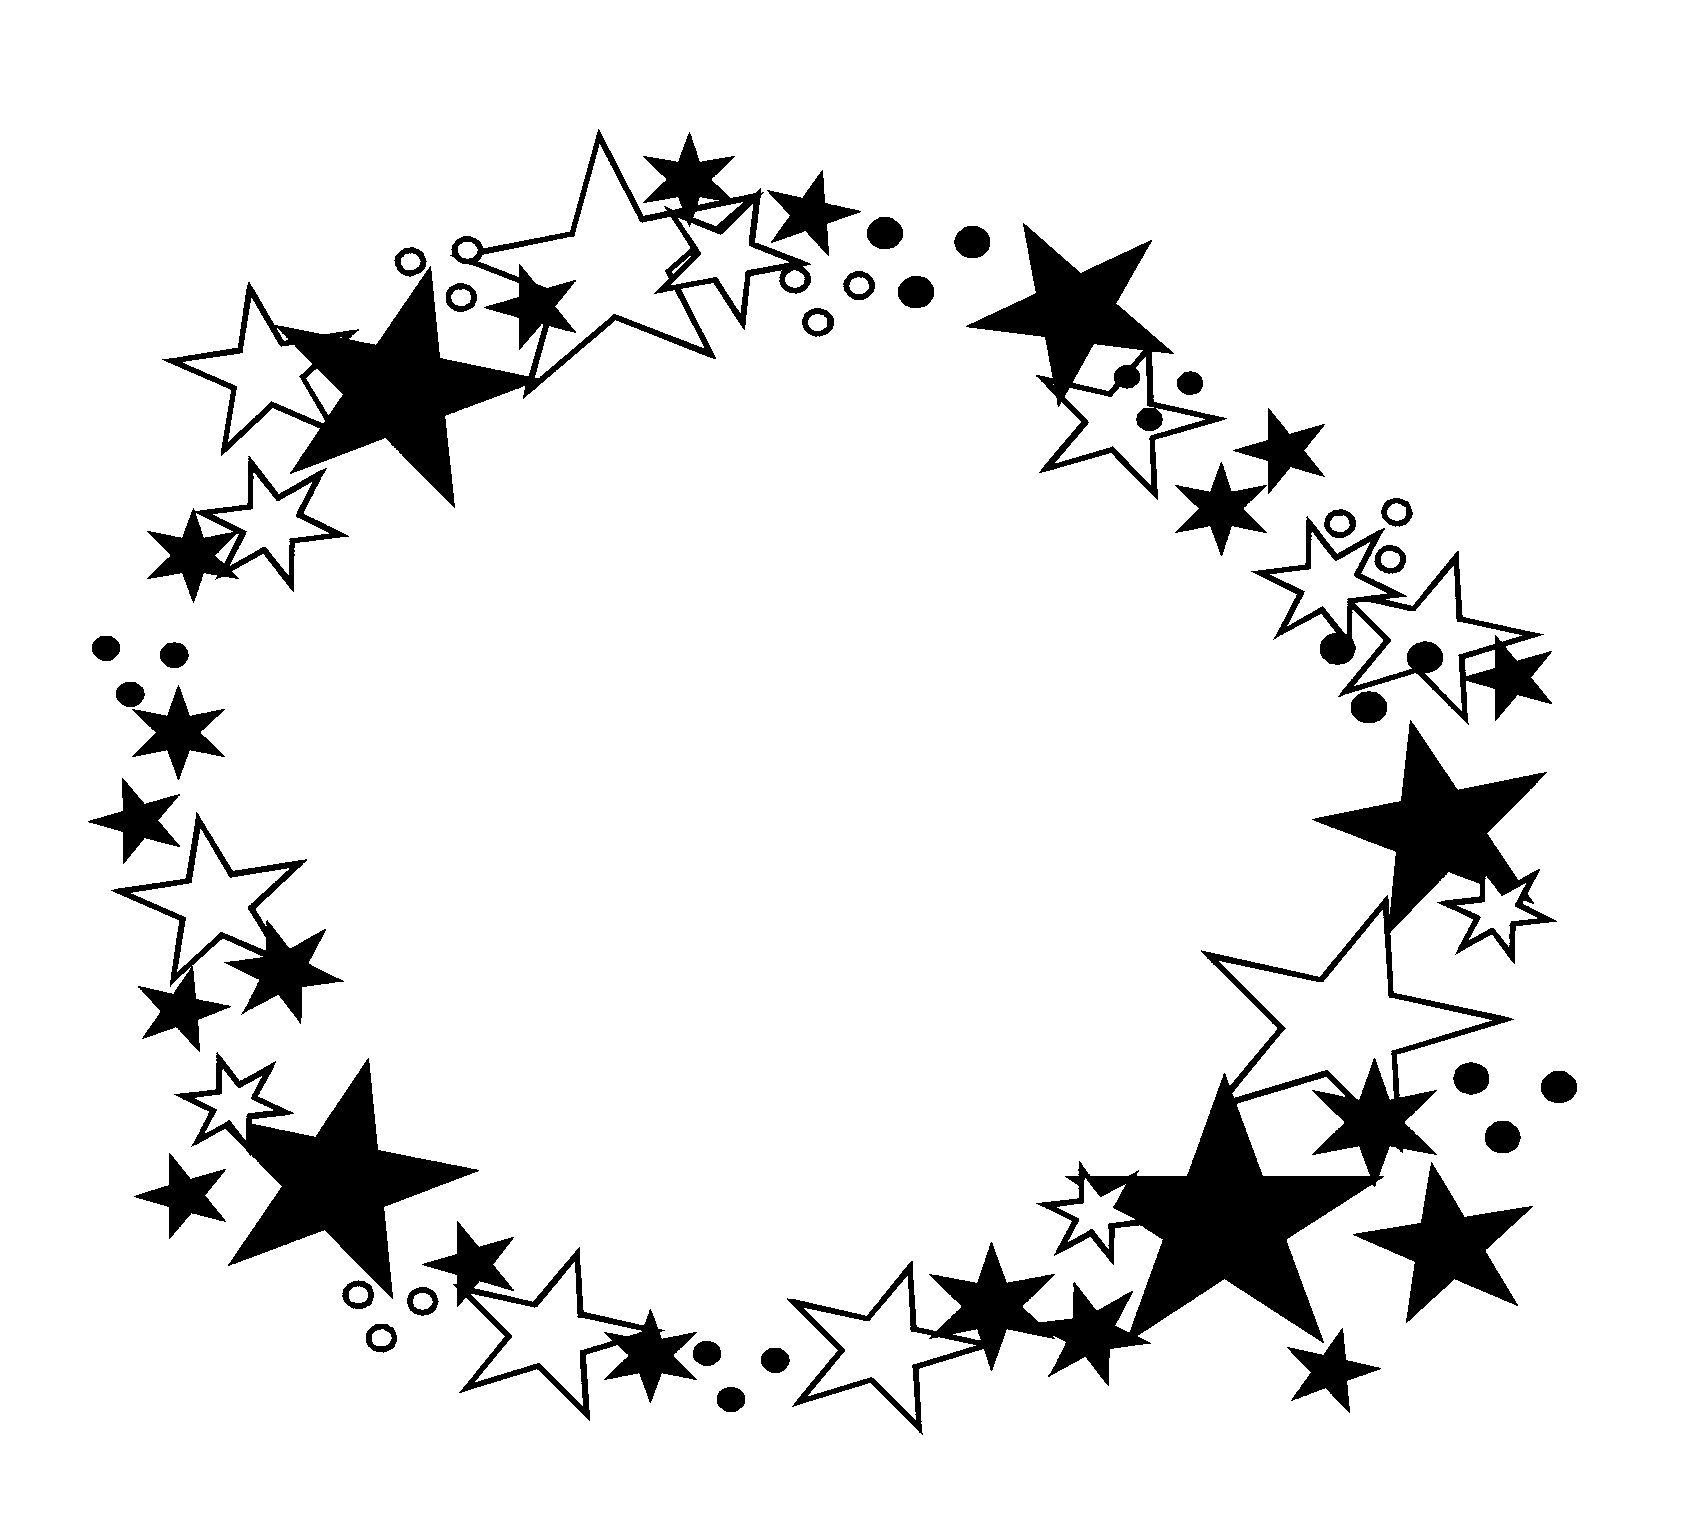 Star clip art free - Clipart library - Clipart library